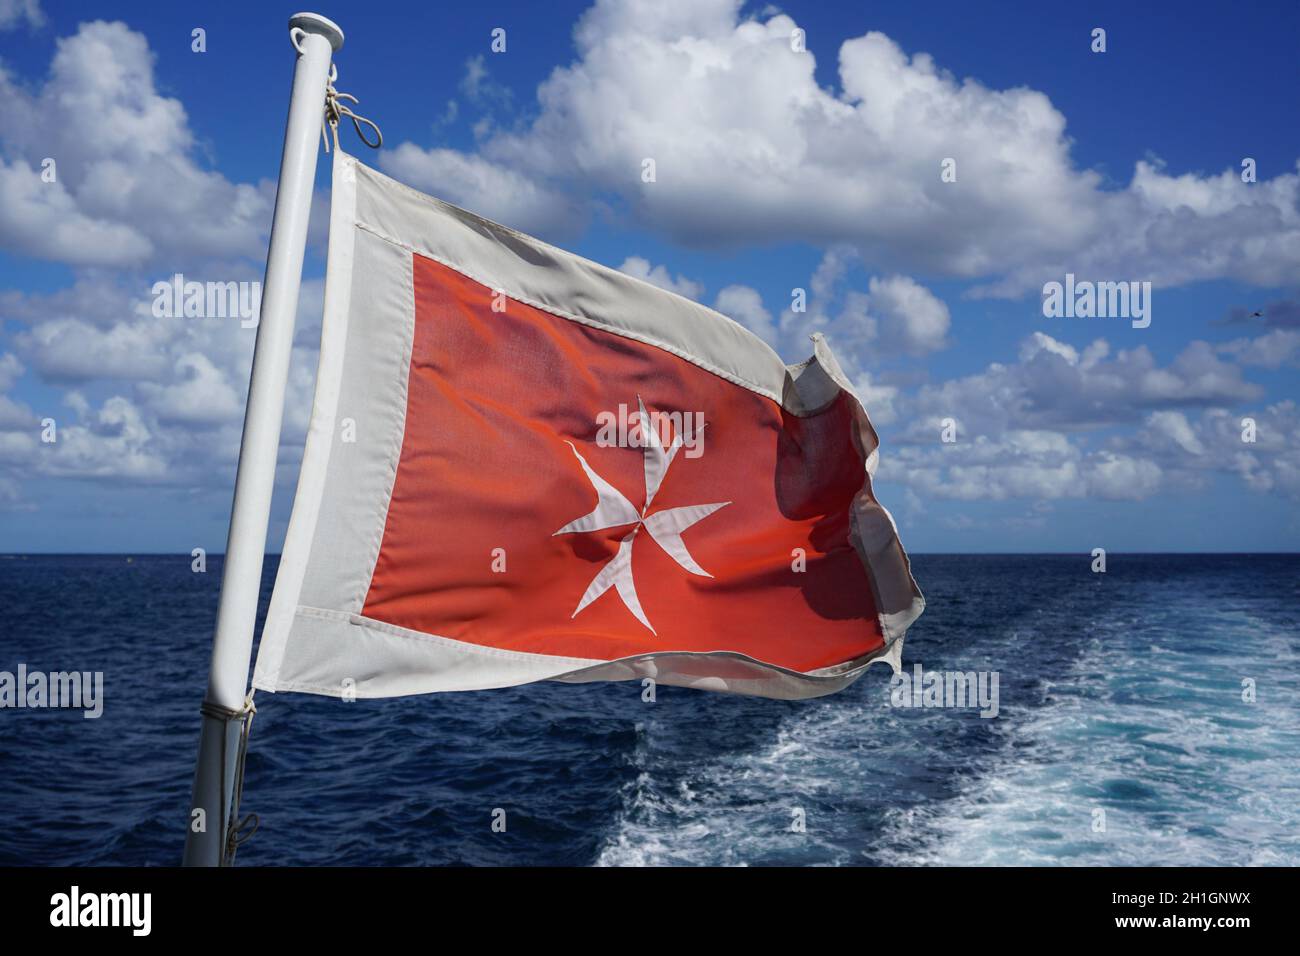 Old Maltese flag. White cross on red background flying at stern of ship travelling in the Mediterranean Sea.Photo by Willy Matheisl Stock Photo